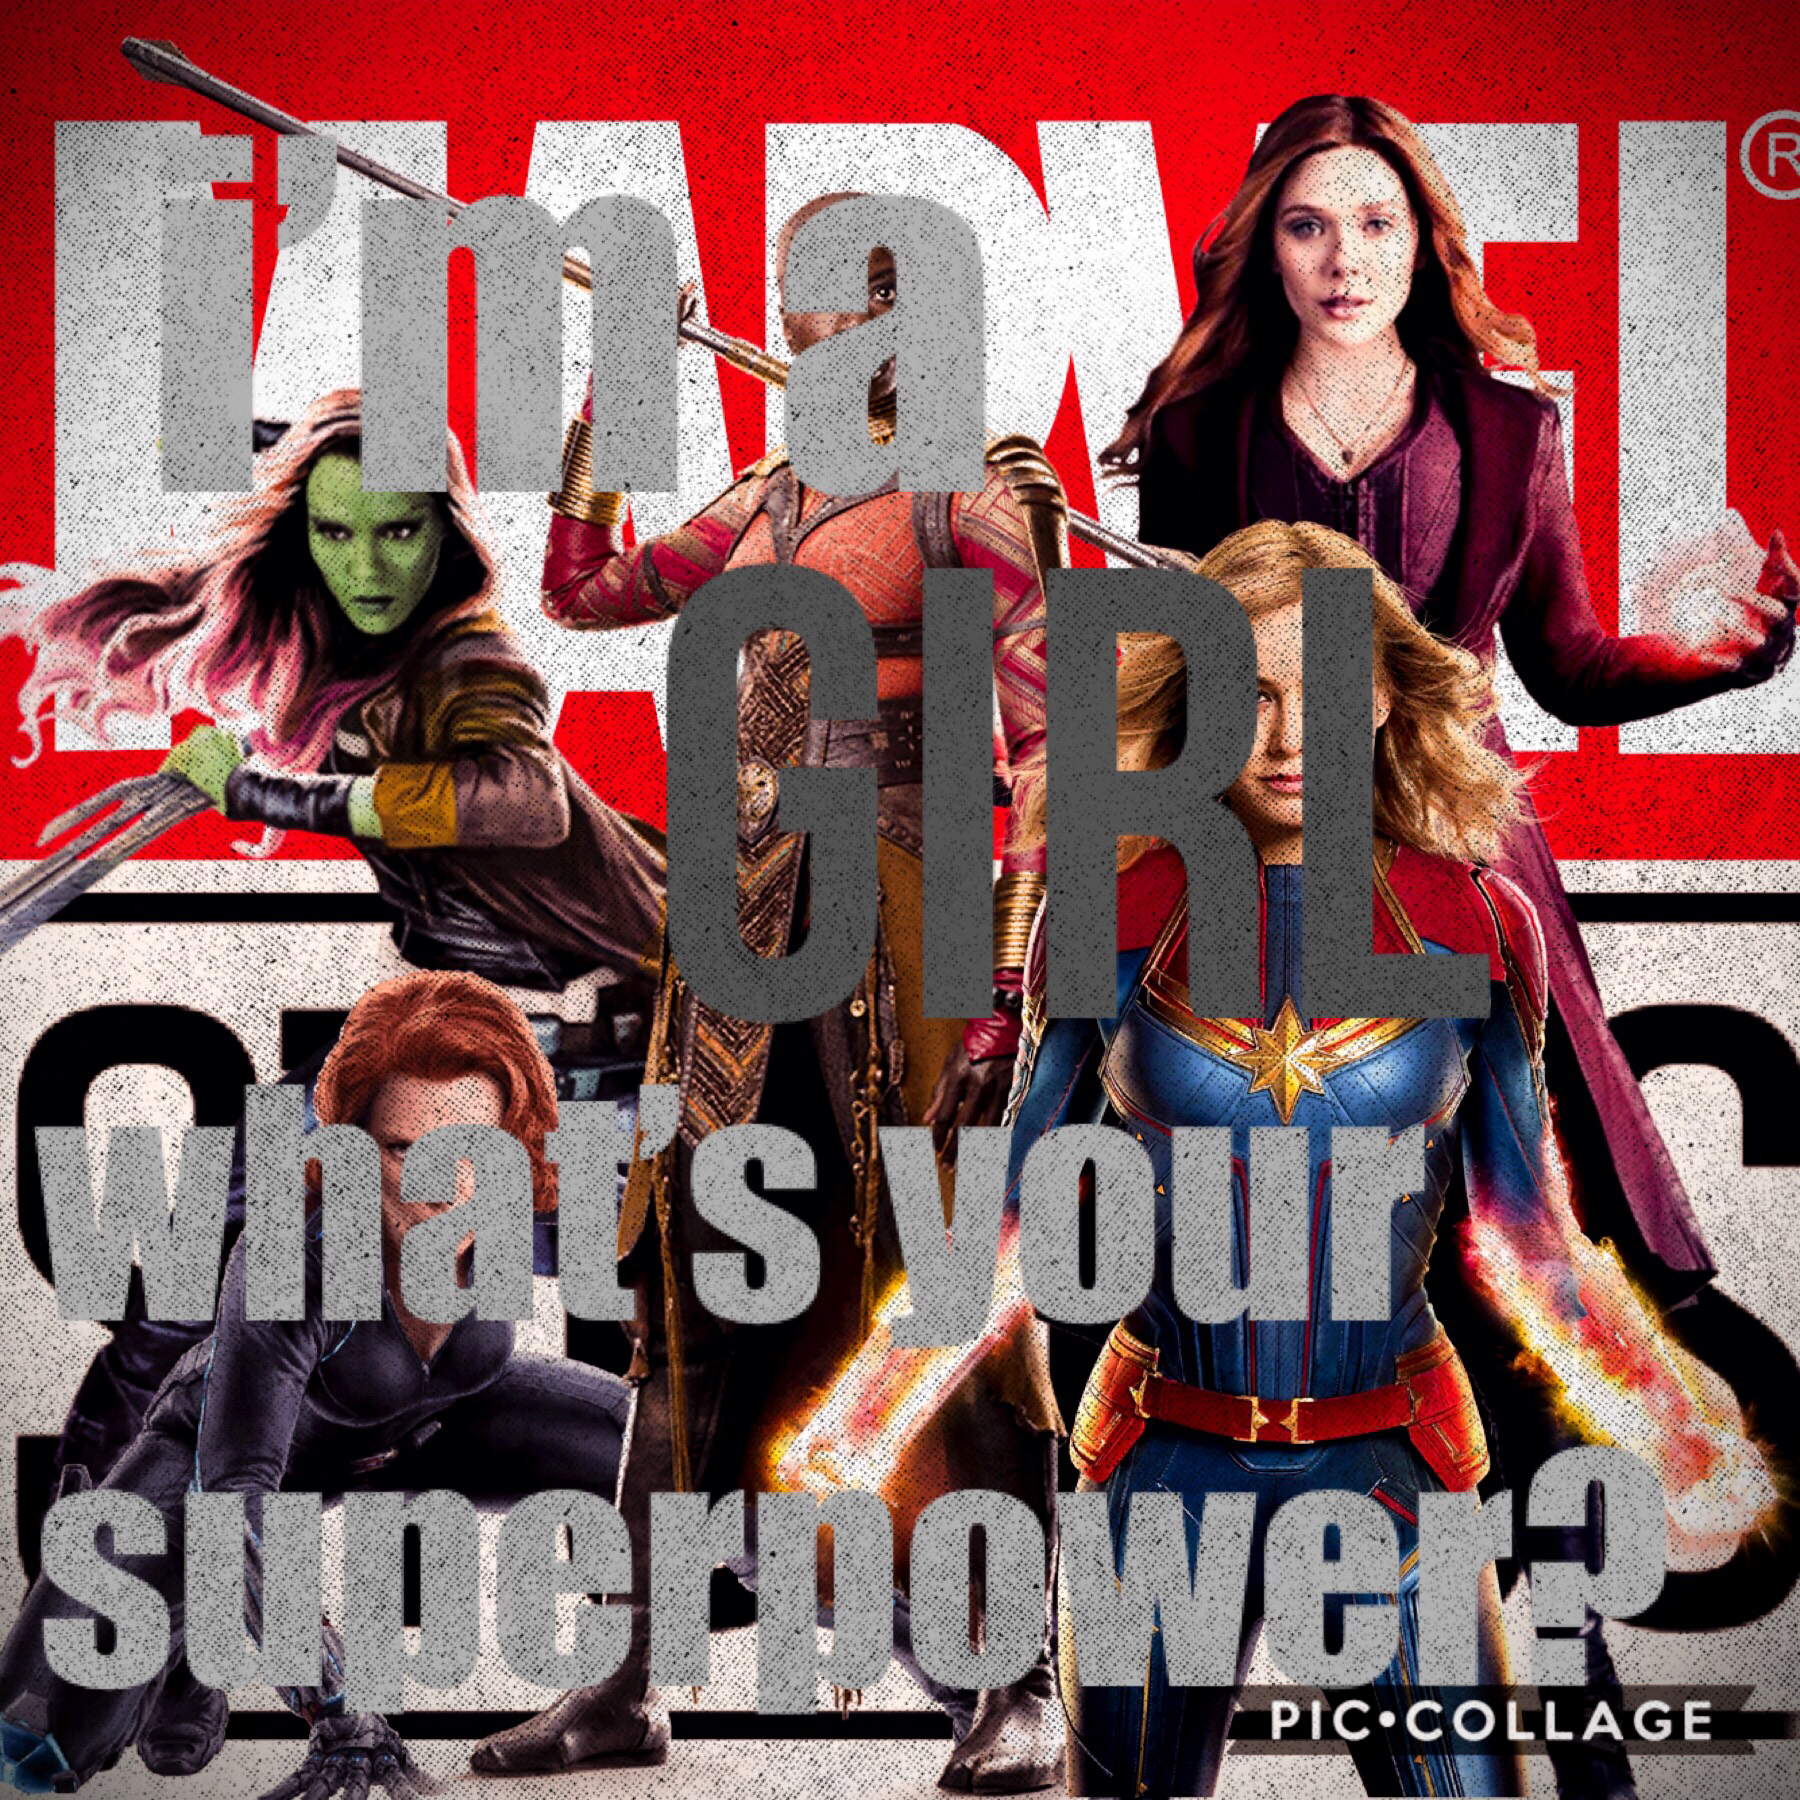 tap... is anyone else obsessed with MARVEL?!?
hope you like it!
be sure to follow, like, and comment!